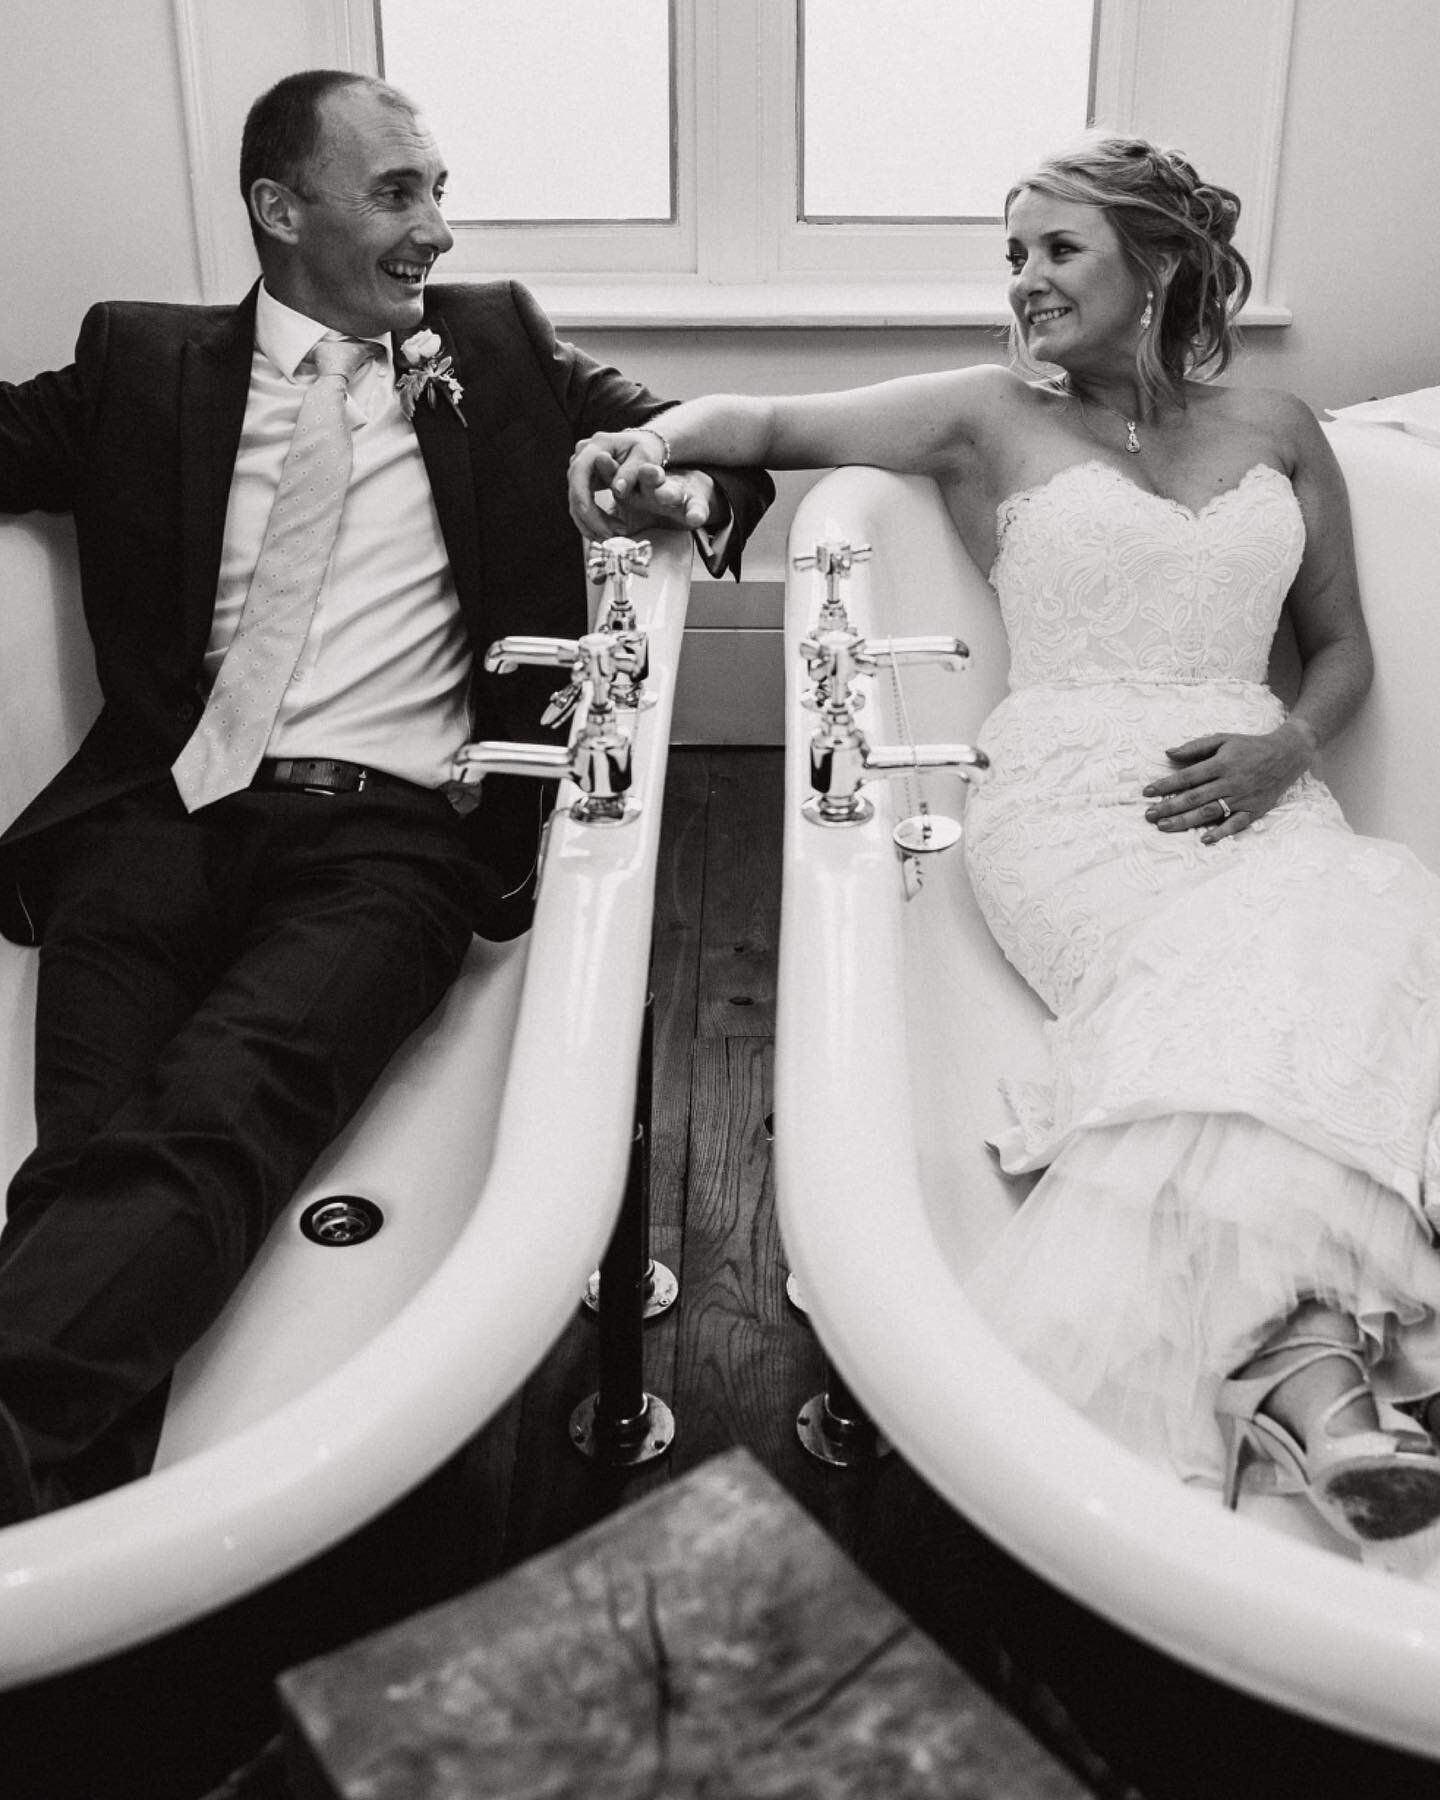 Ode to a Bathtub // Didsbury House Hotel ⚡️

It&rsquo;s always great once the pressures of a wedding ceremony are all over and dusted and you can kick back and relax in a luxurious open bathtub (or two!).

Lucy and Rick&rsquo;s Didsbury House Hotel w